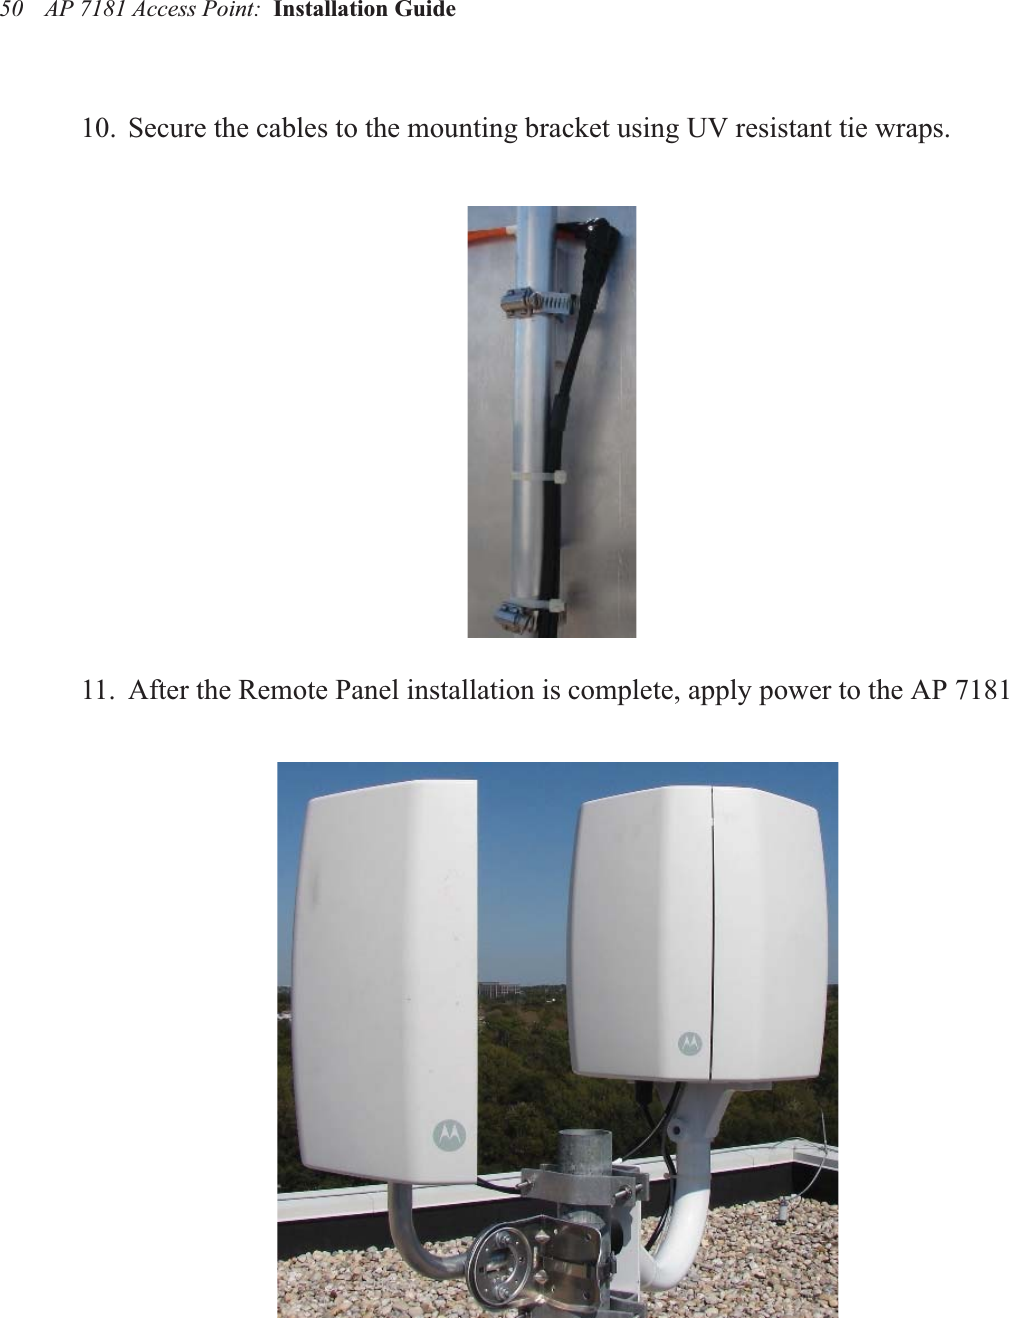 AP 7181 Access Point:  Installation Guide 5010. Secure the cables to the mounting bracket using UV resistant tie wraps.11. After the Remote Panel installation is complete, apply power to the AP 7181